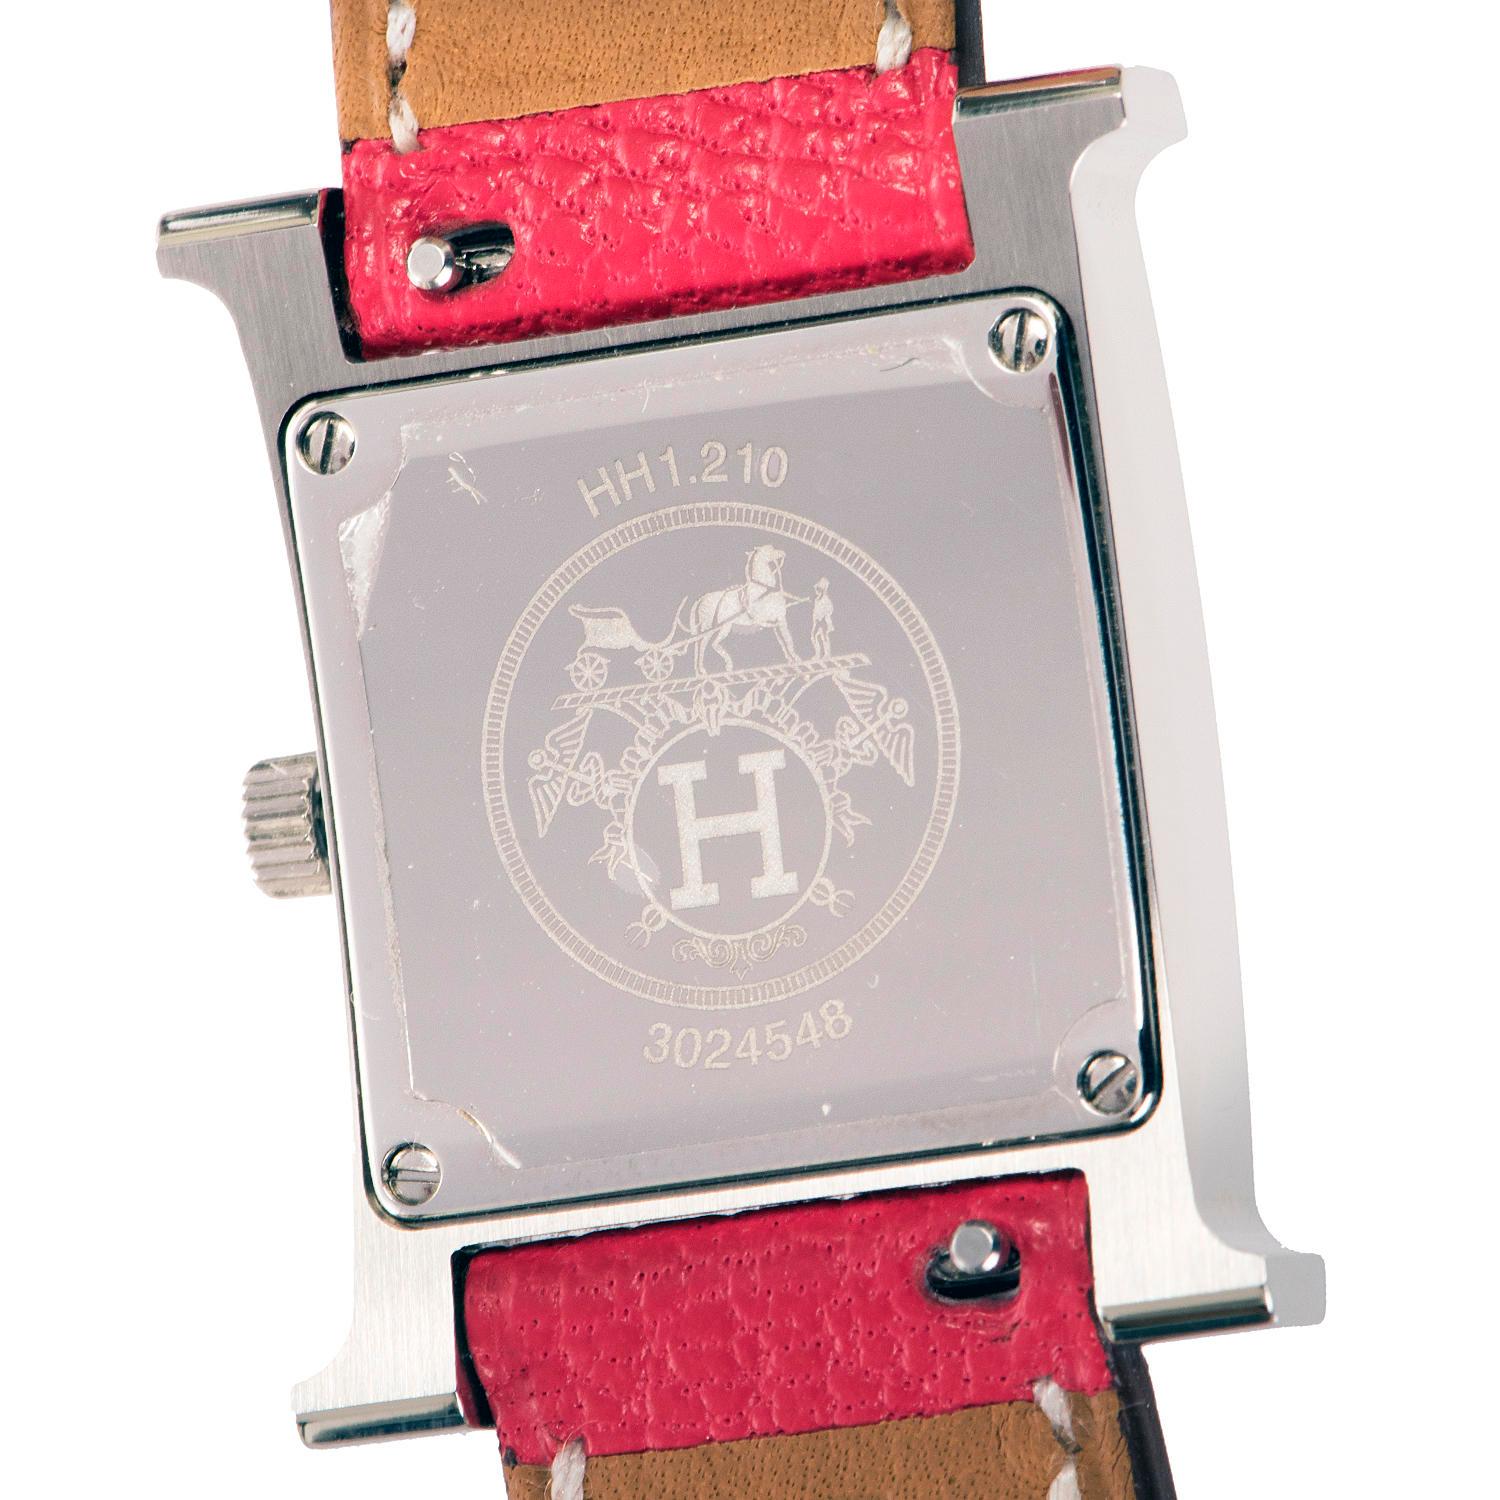 A 'Never- worn' pristine condition Hermes 'Heure H' 21mm double tour Palladium silver lady's Quartz wristwatch. Numbered 3024548 and bearing the Hermes date stamp P in a square, the Swiss made movement has a white dial with a silver palladium case,